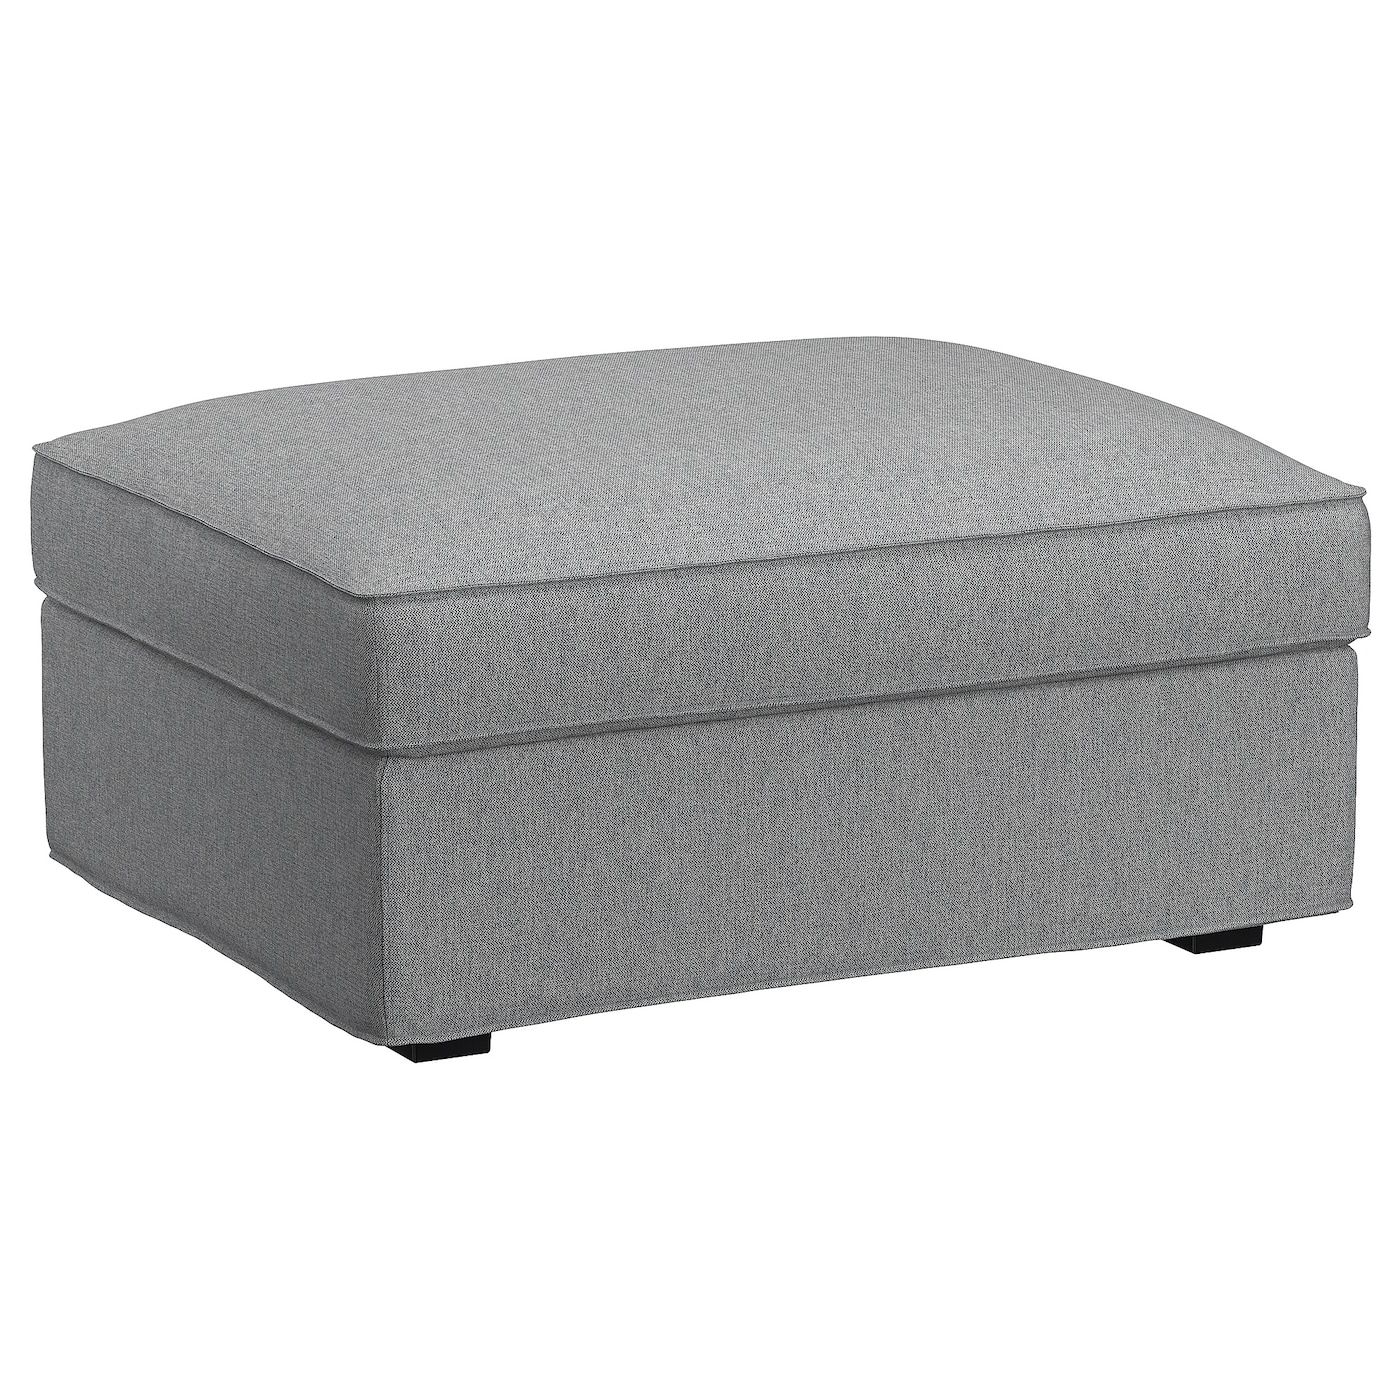 Kivik Ottoman With Storage, Tibbleby Beige/gray – Ikea Within Well Known Gray Ottomans (View 1 of 10)